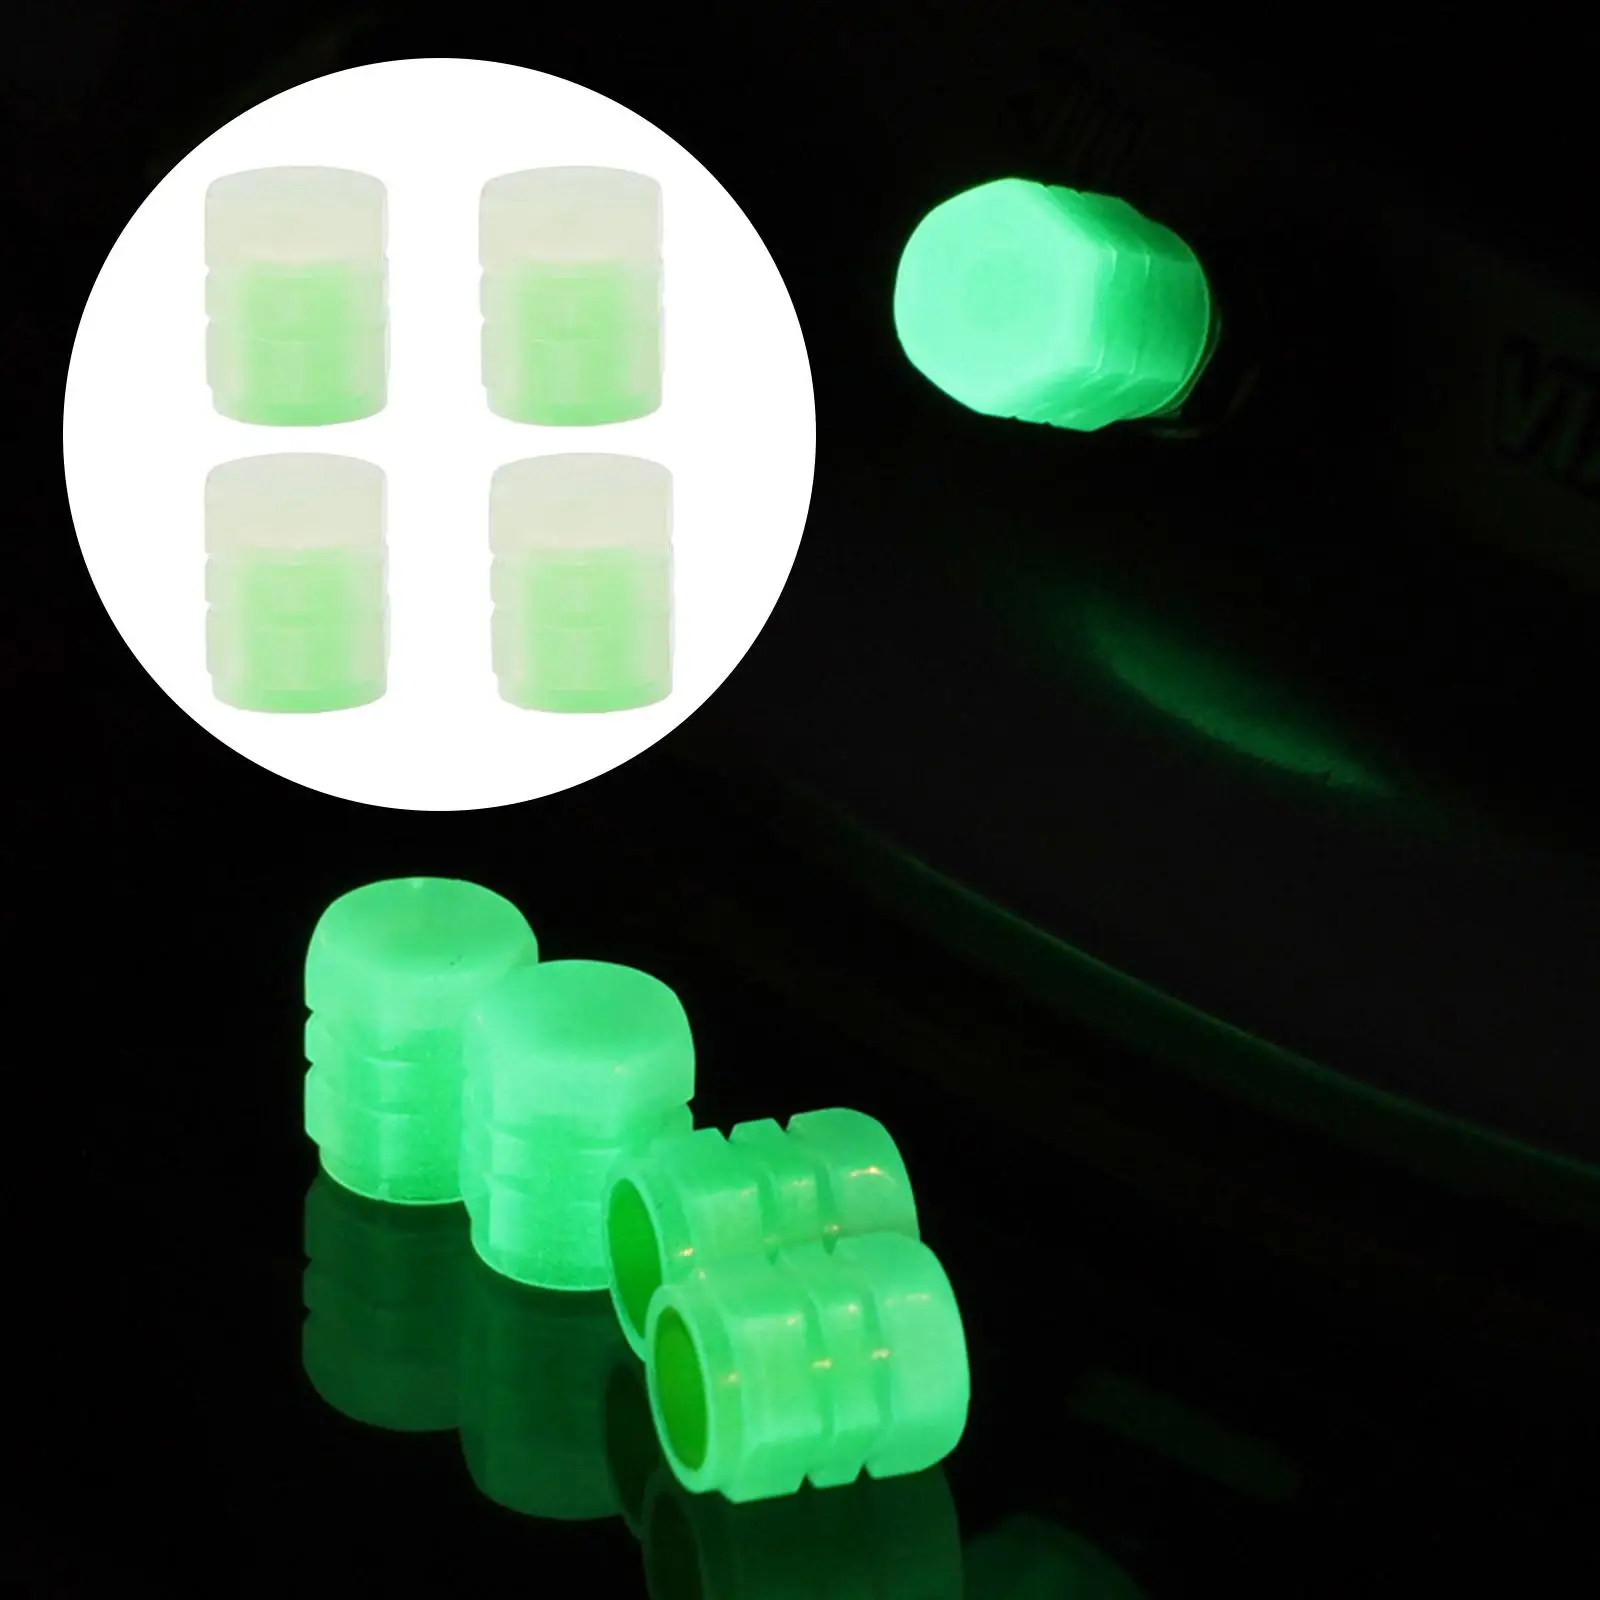 Set of 4 Glowing Tire Valve Stem Cover Tyre Accessories Effective Seal